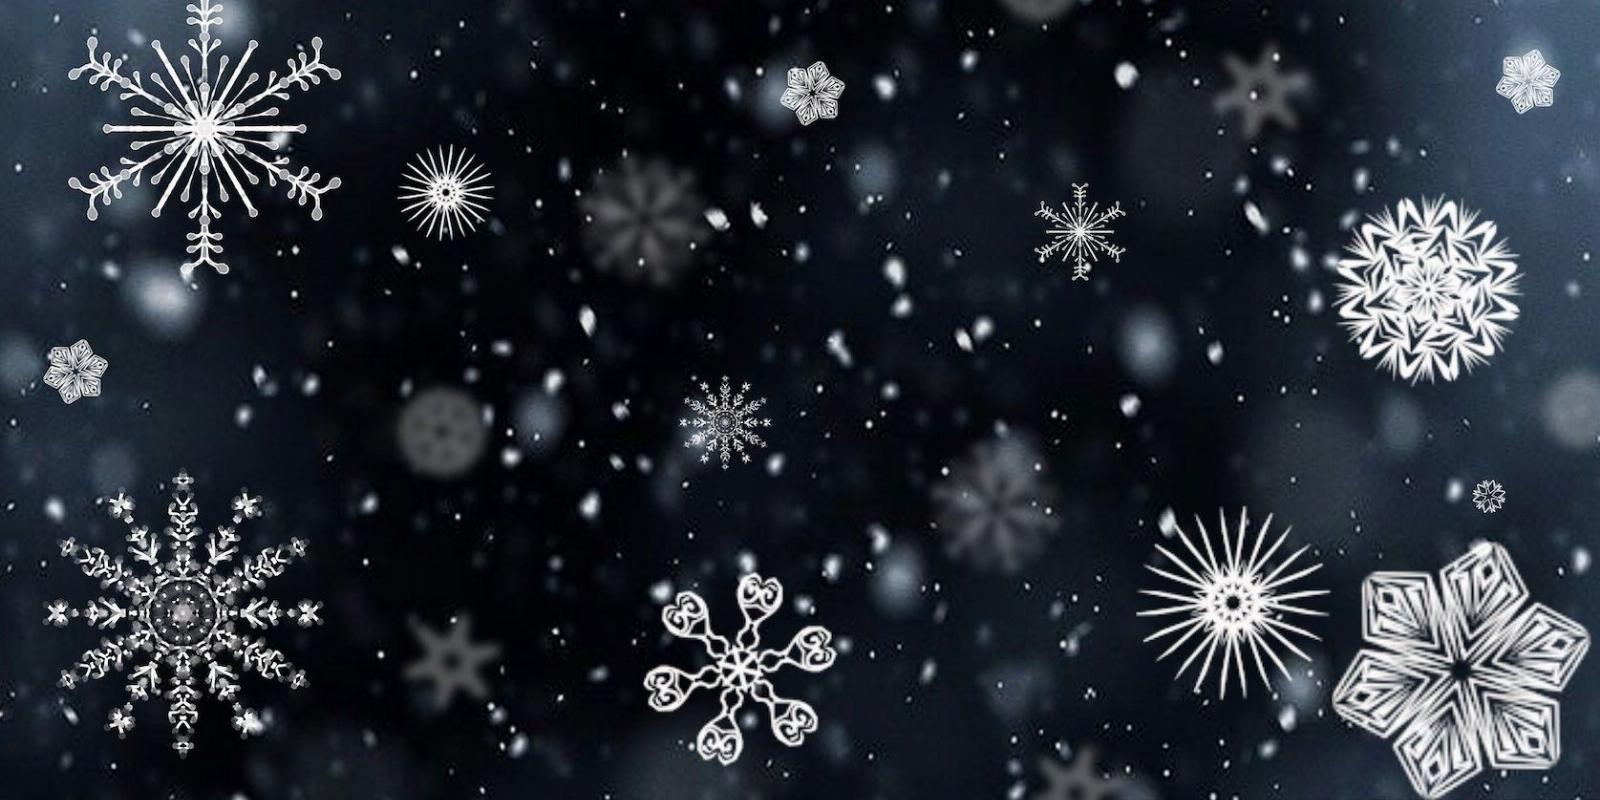 How to Animate Snow With Adobe After Effects